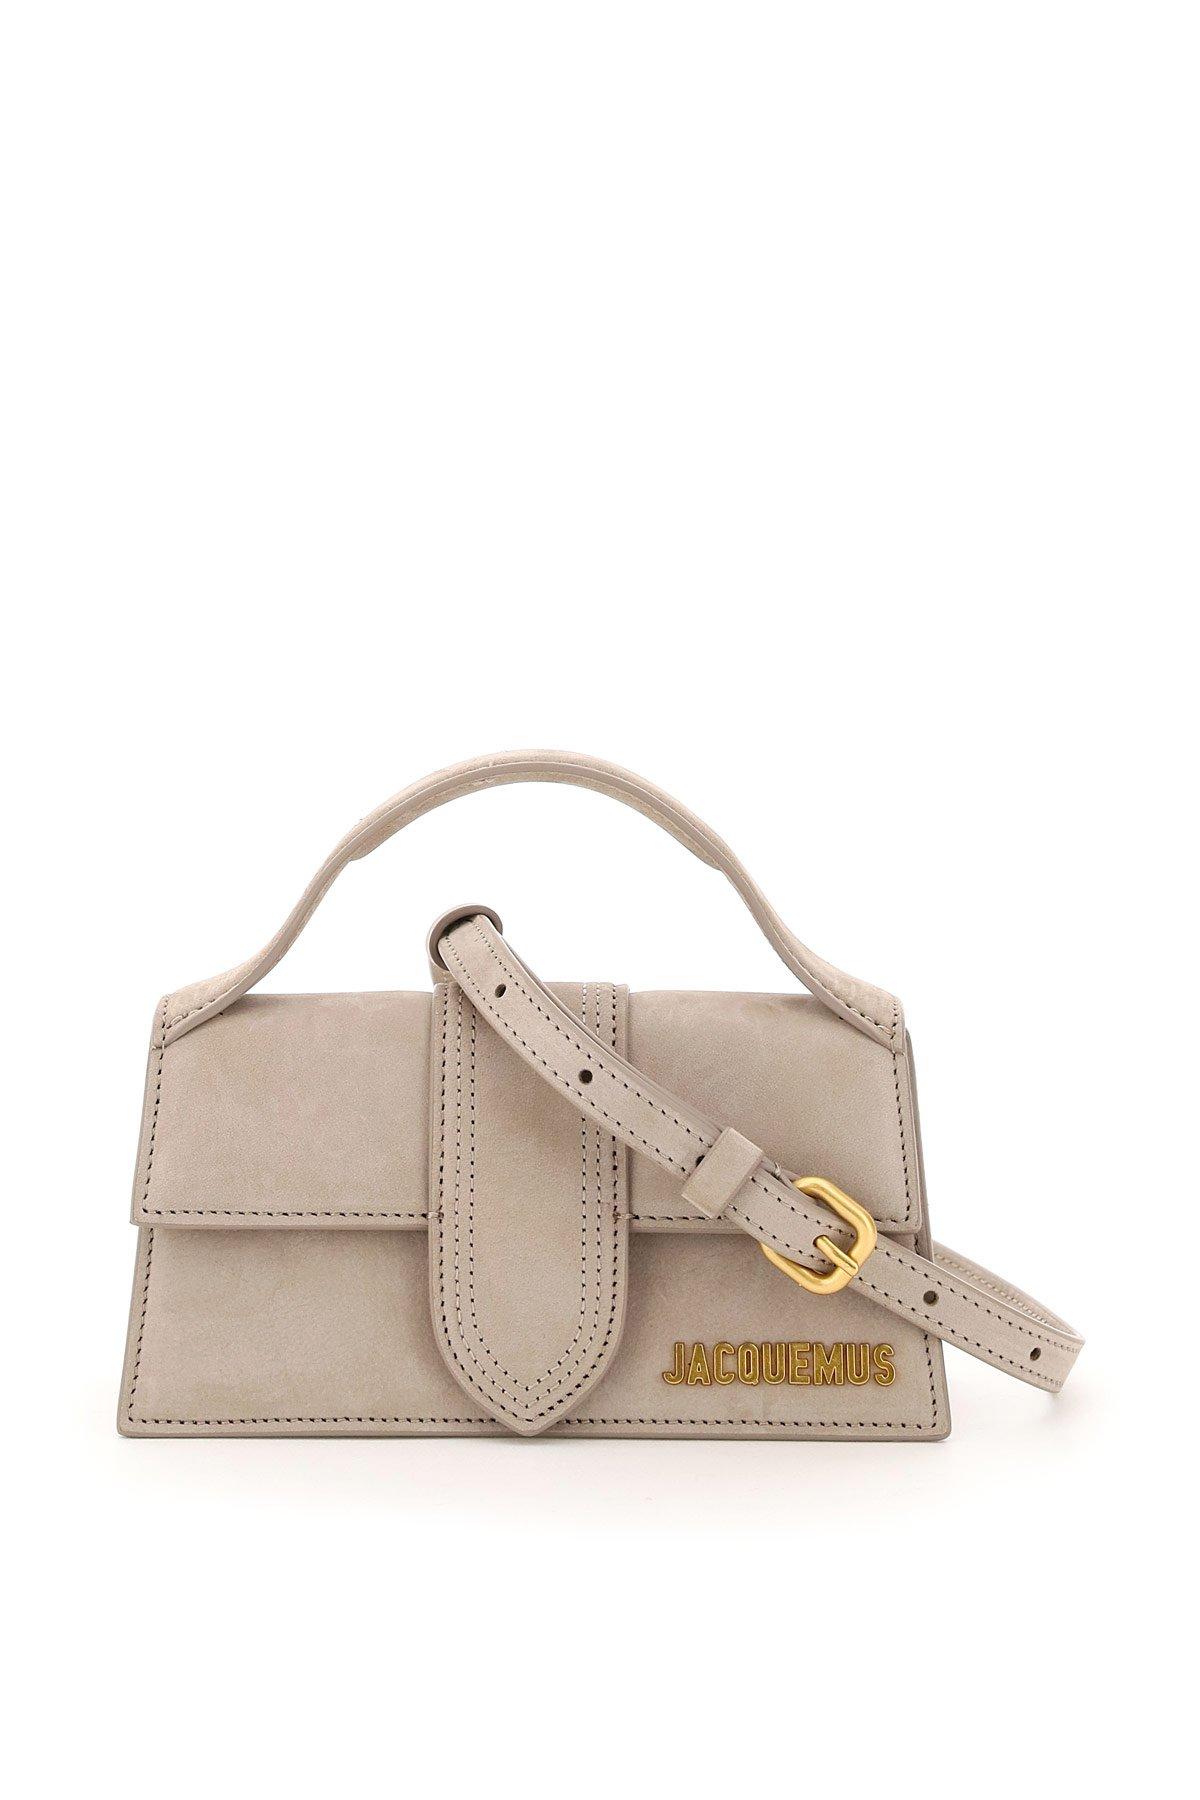 Jacquemus Leather Le Bambino Tote Bag in Beige (Natural) - Lyst